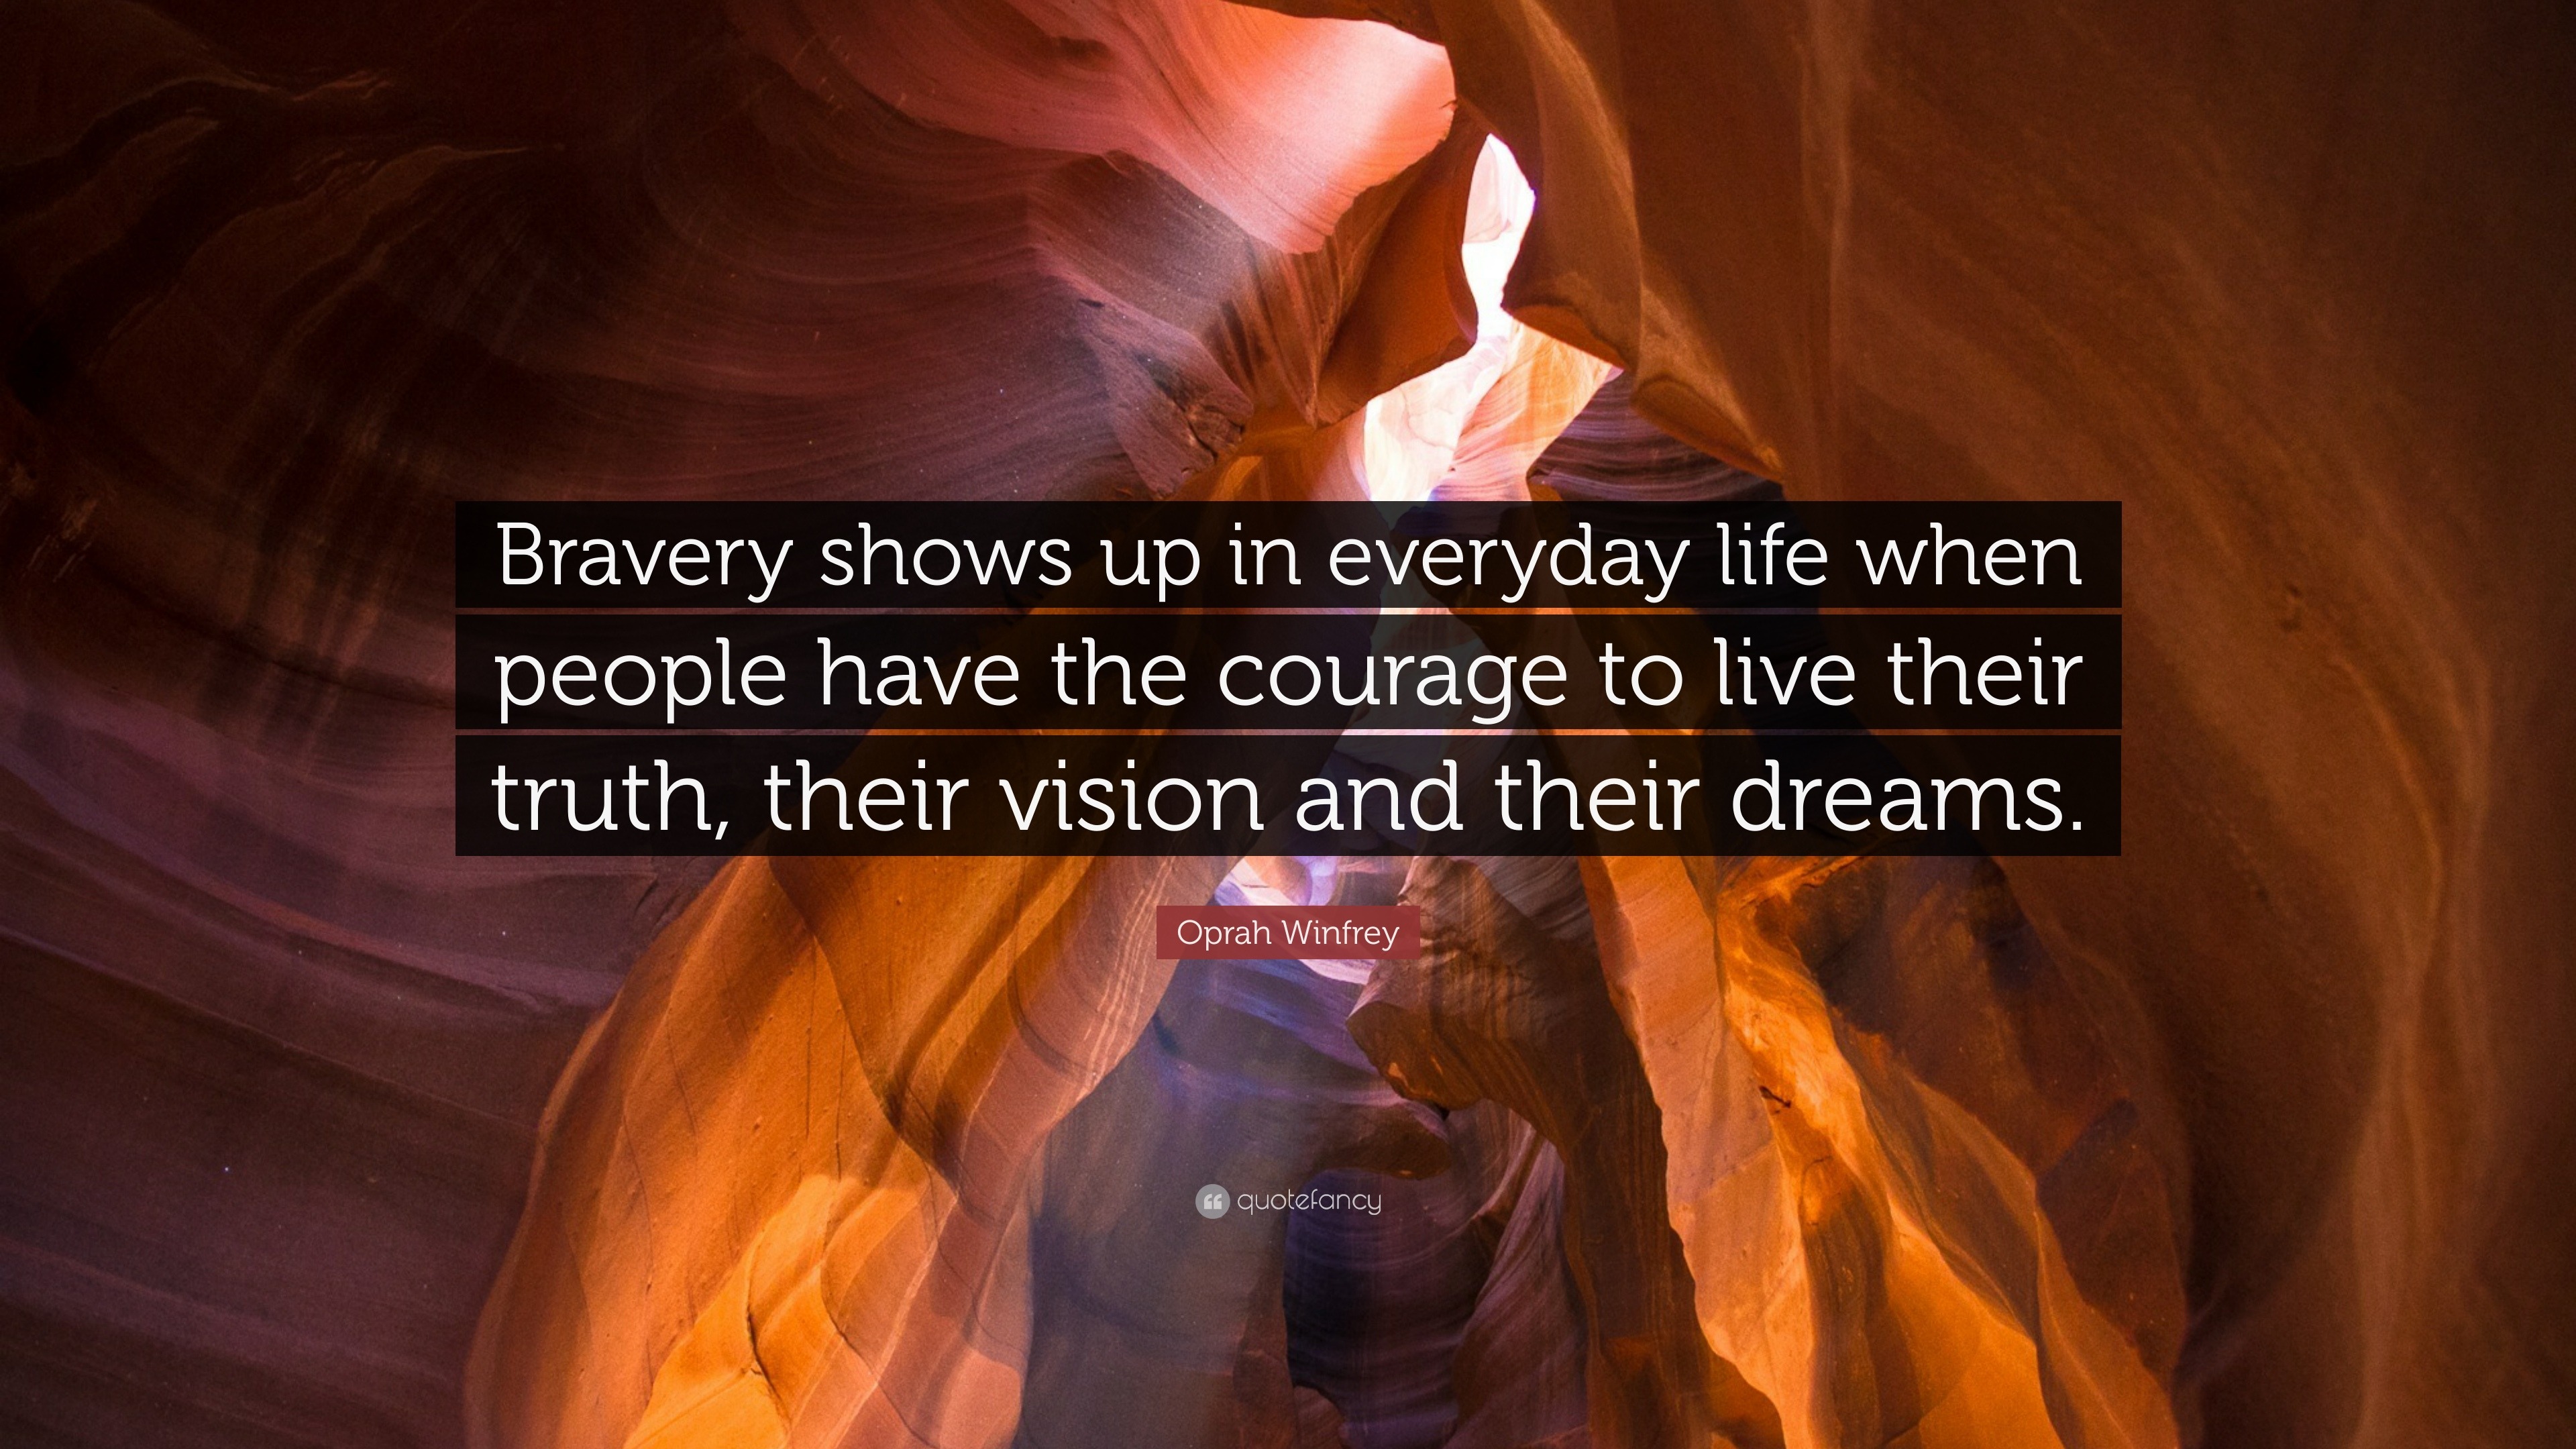 Oprah Winfrey Quote: “Bravery shows up in everyday life when people have  the courage to live